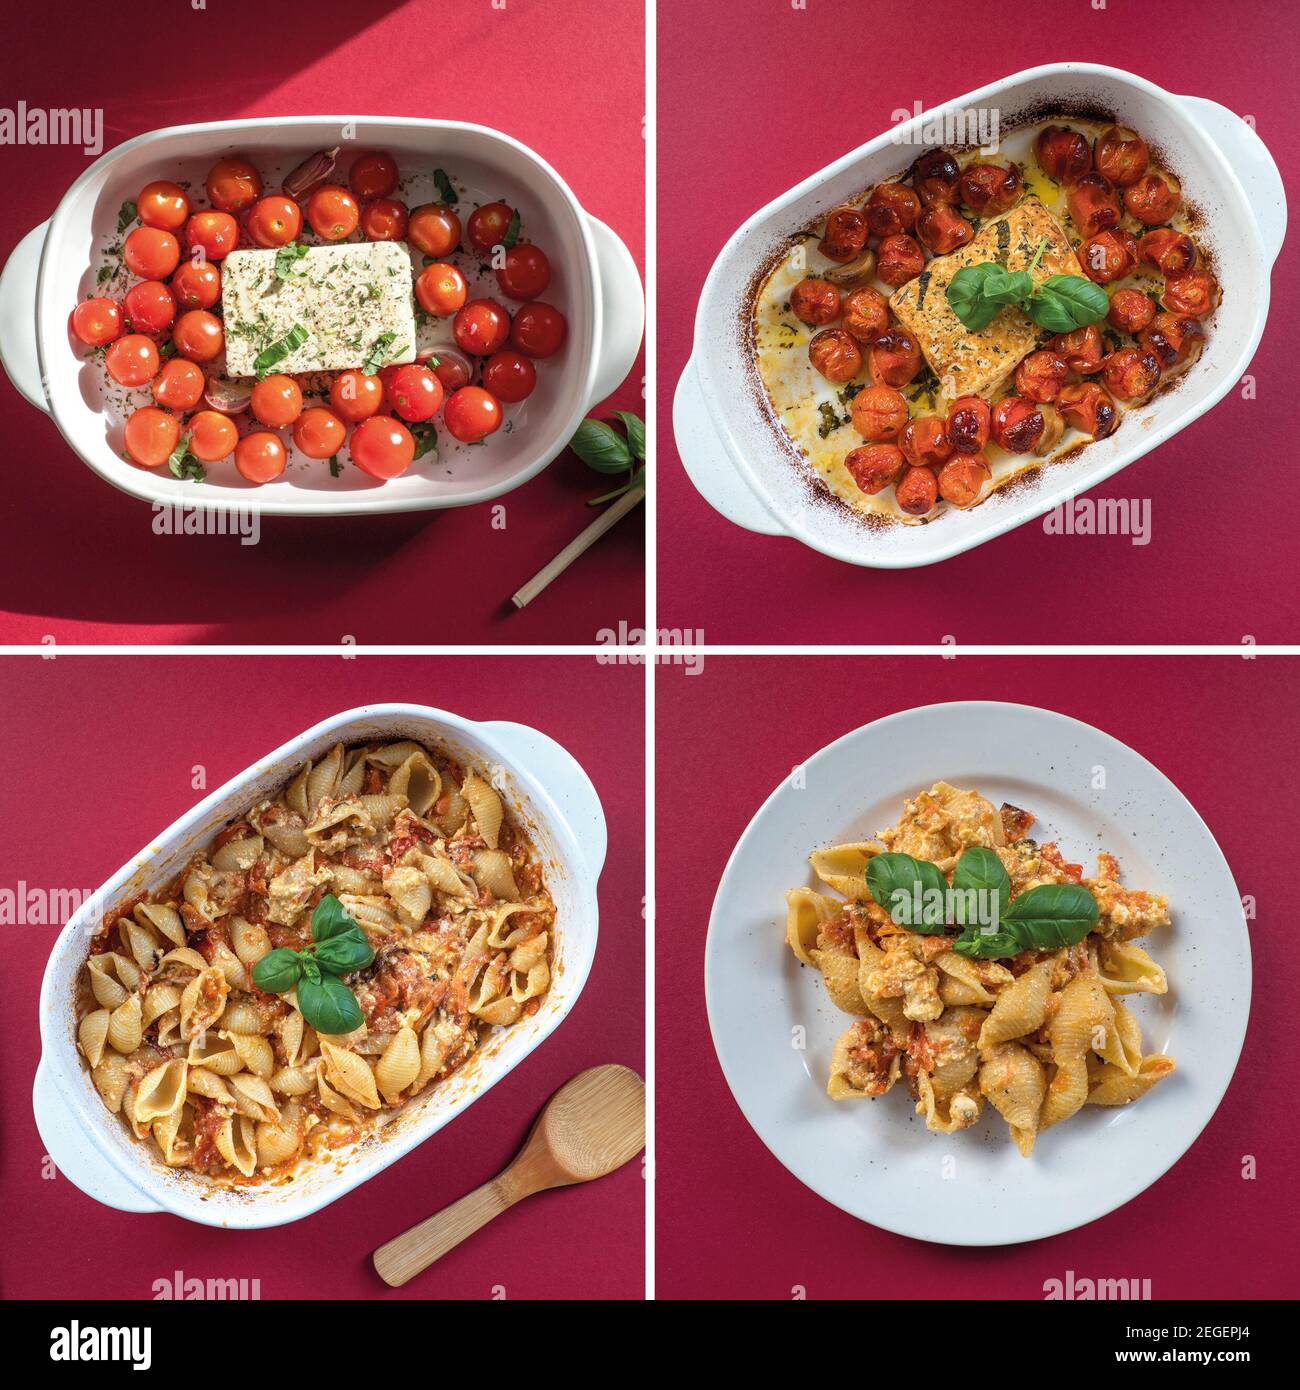 Step by step cooking instructions for the viral Feta bake pasta recipe with roasted cherry tomatoes, cheese, herbs and garlic. Stock Photo